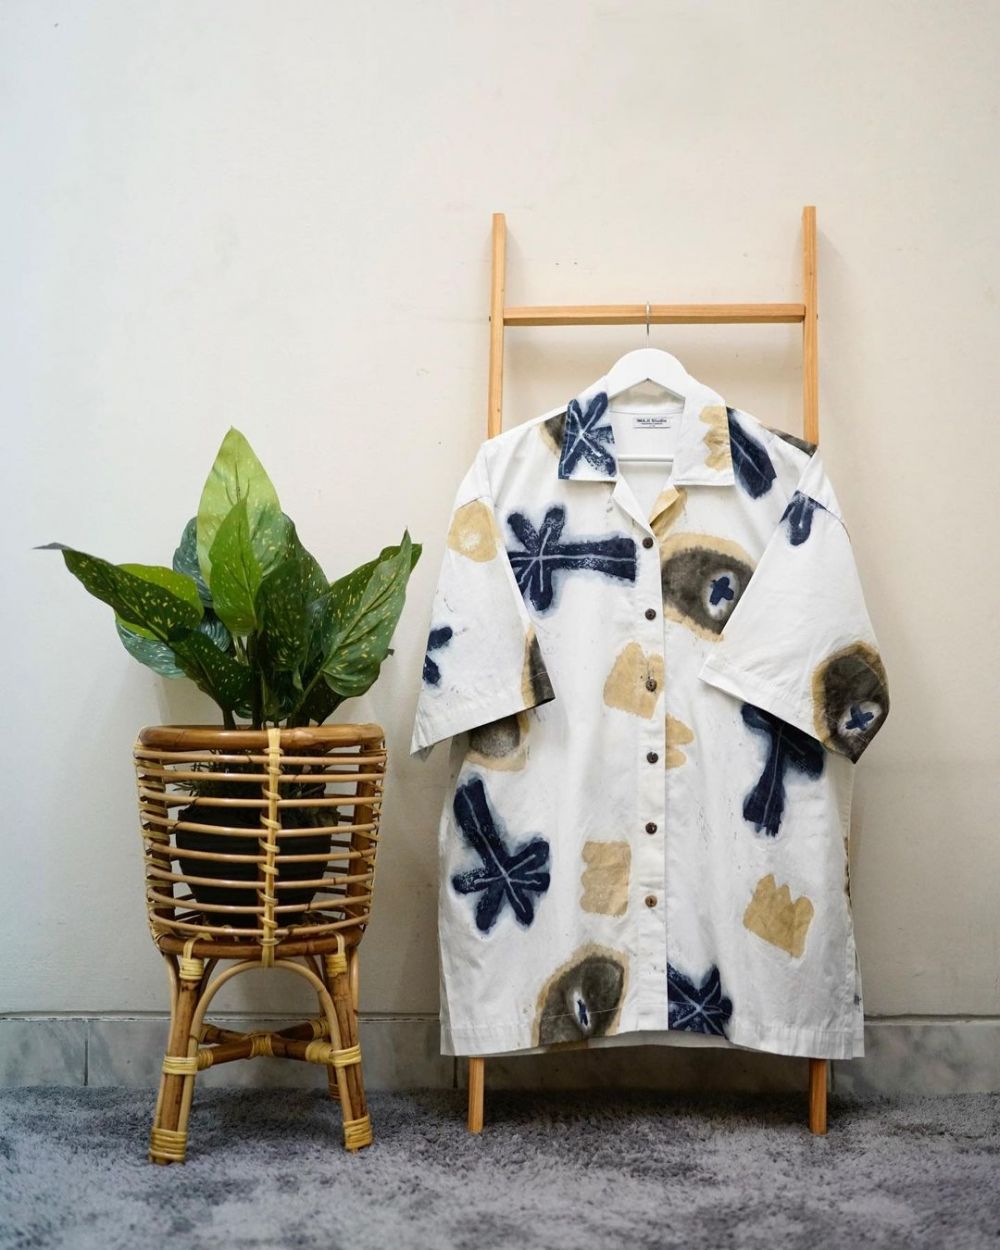 9 Local Fashion Brands with Environmentally Friendly Concepts, Salute!